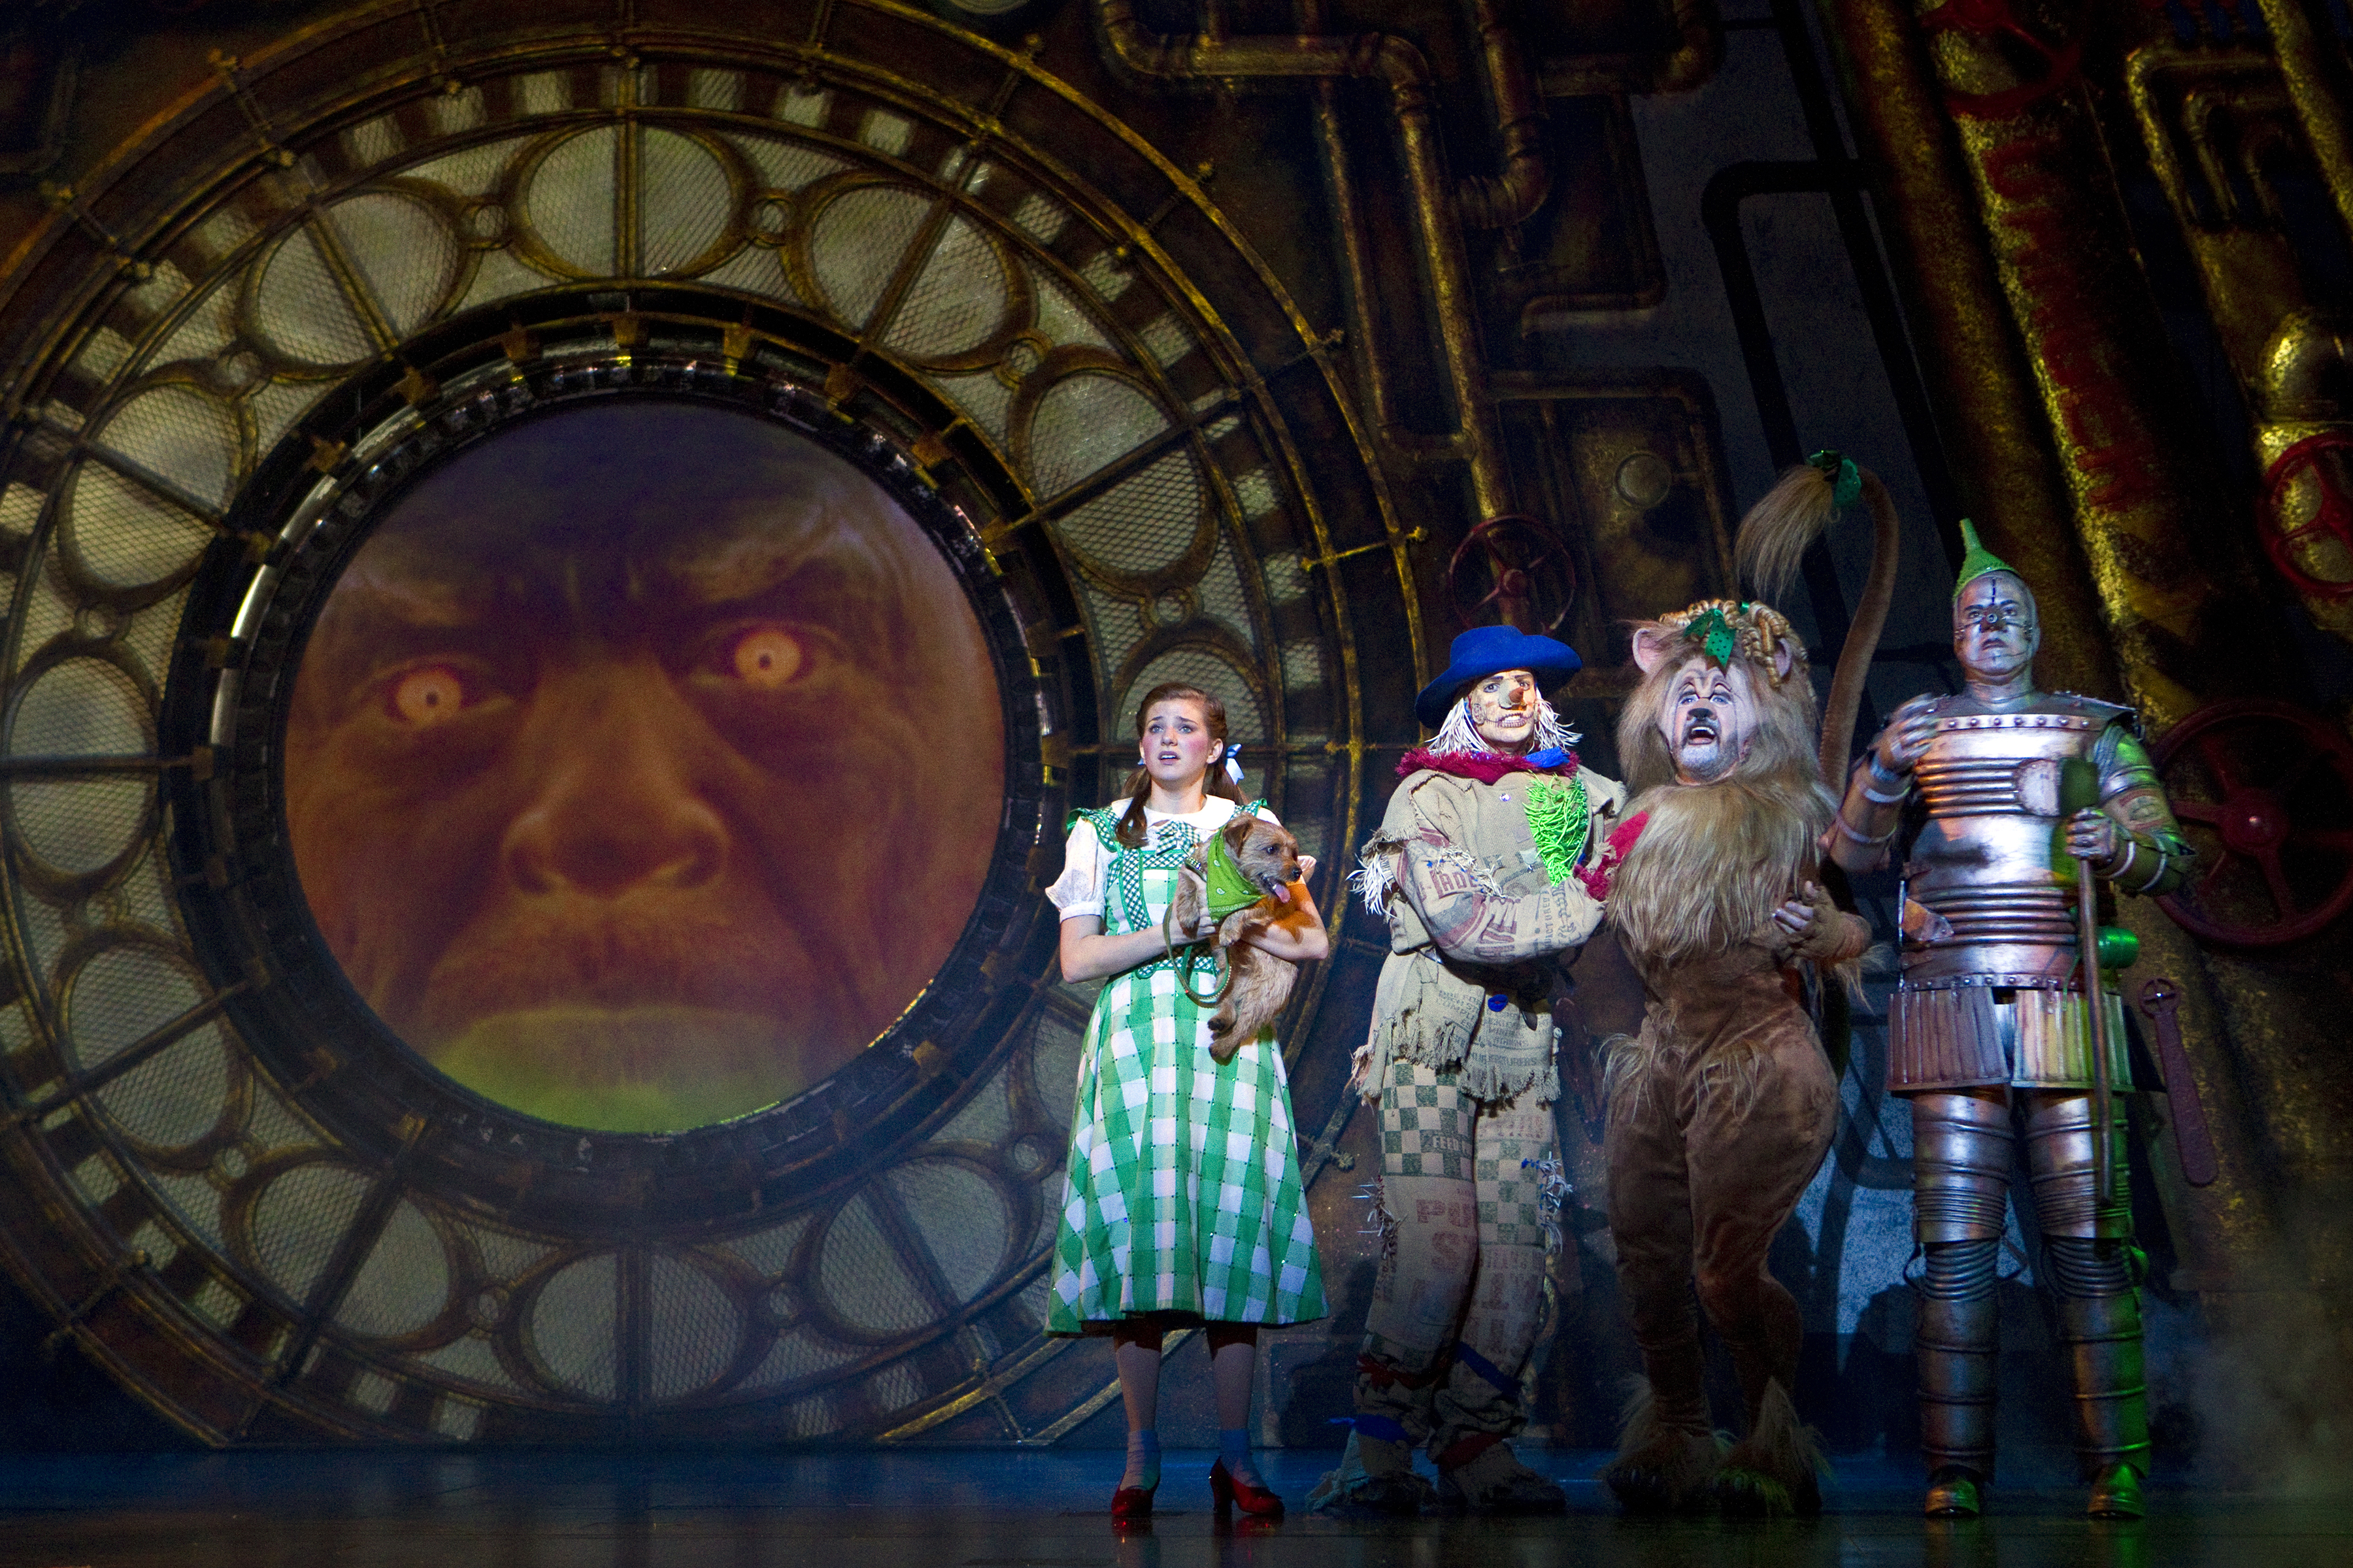  - Danielle-Wade-as-Dorothy-Jamie-McKnight-as-Scarecrow-Lee-MacDougall-as-Lion-Mike-Jackson-as-Tin-Man-in-THE-WIZARD-OF-OZ